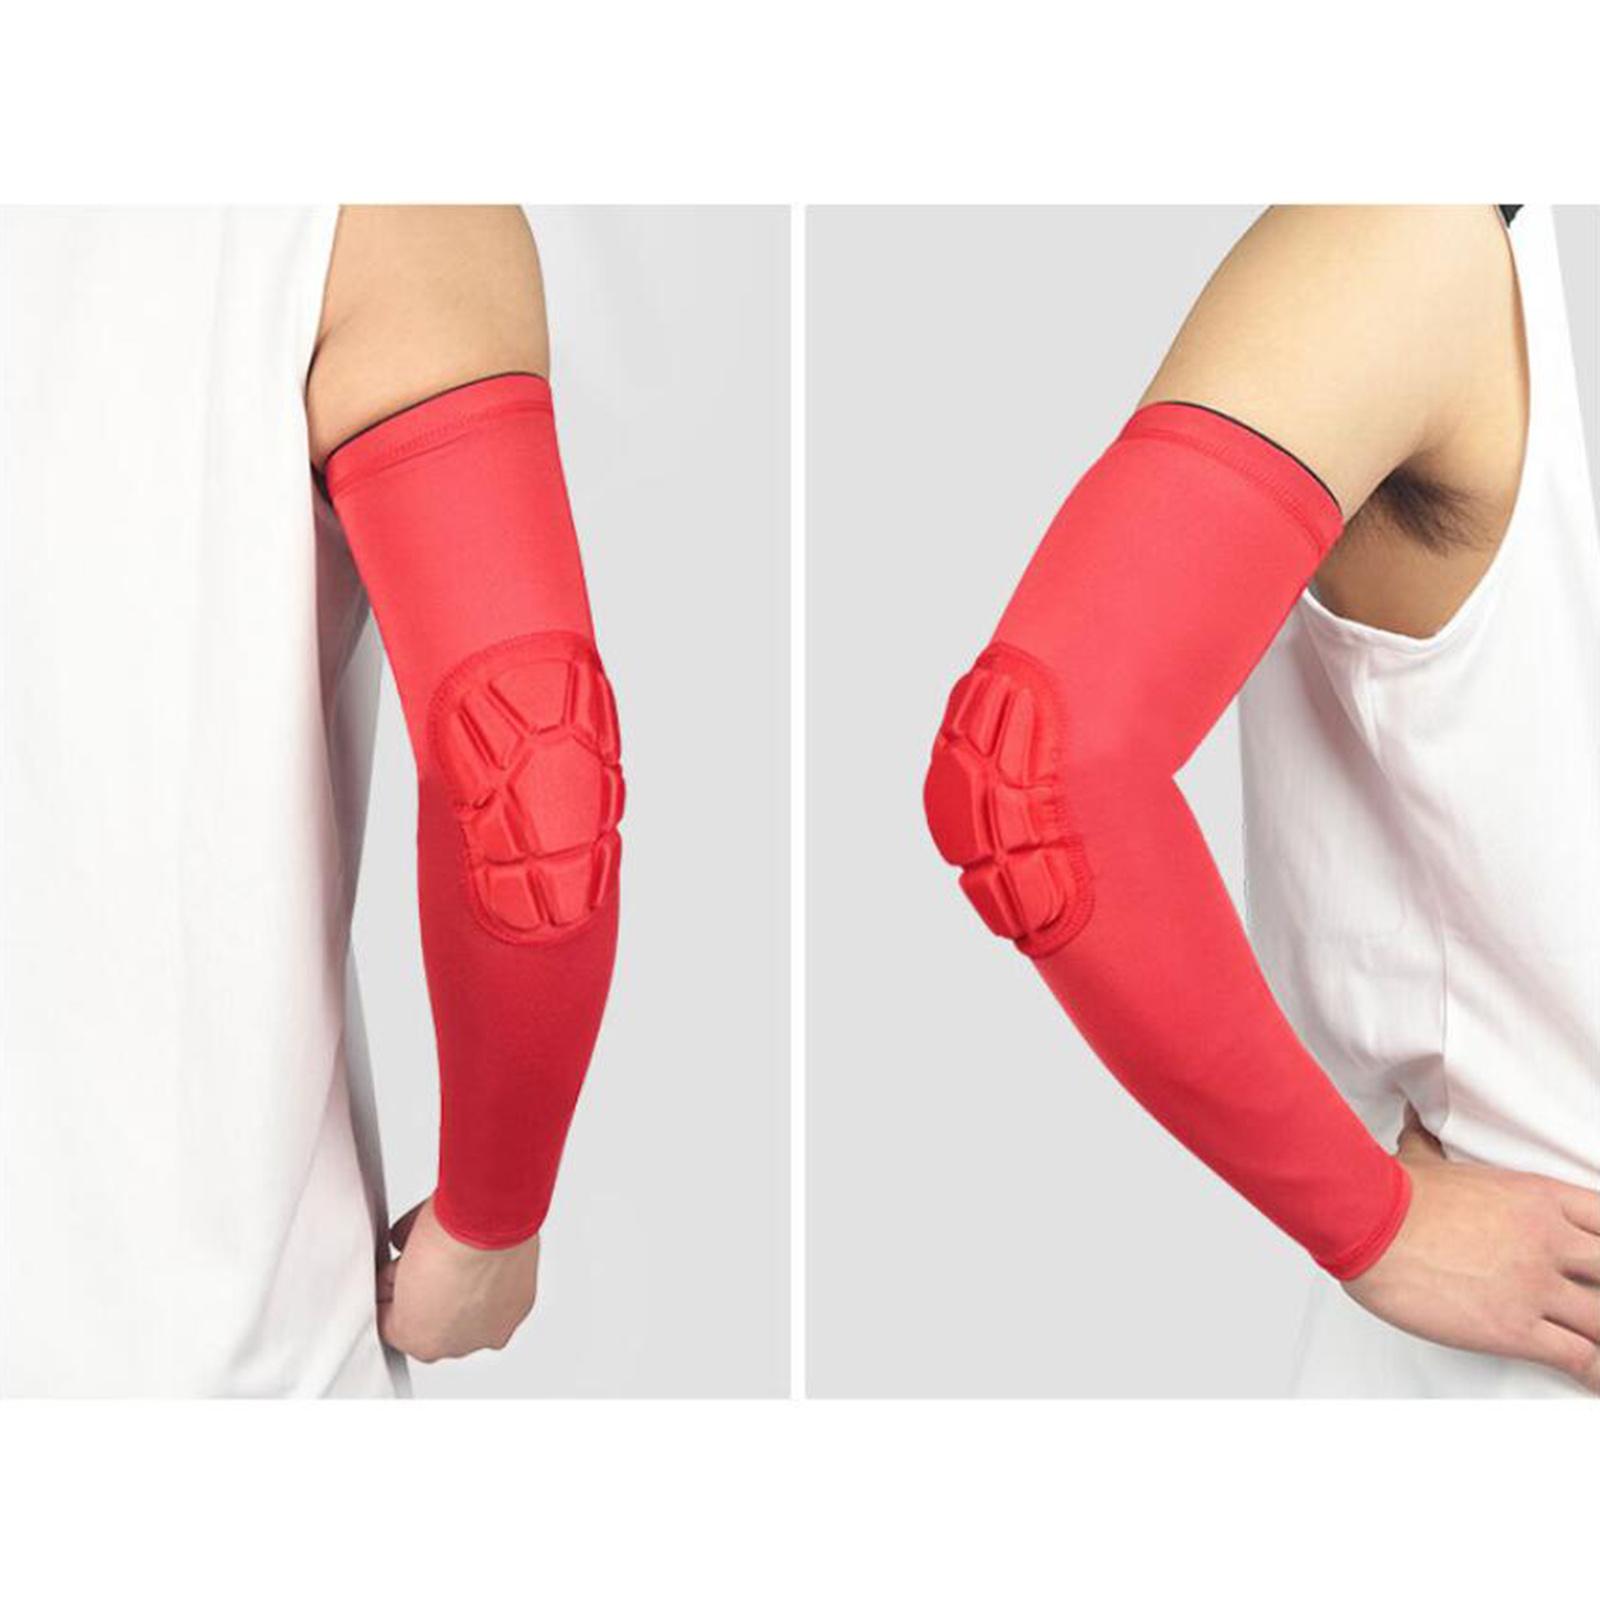 Elbow Support Compression Honeycomb Pad Brace Joint Arm Sleeve Sport Red XL